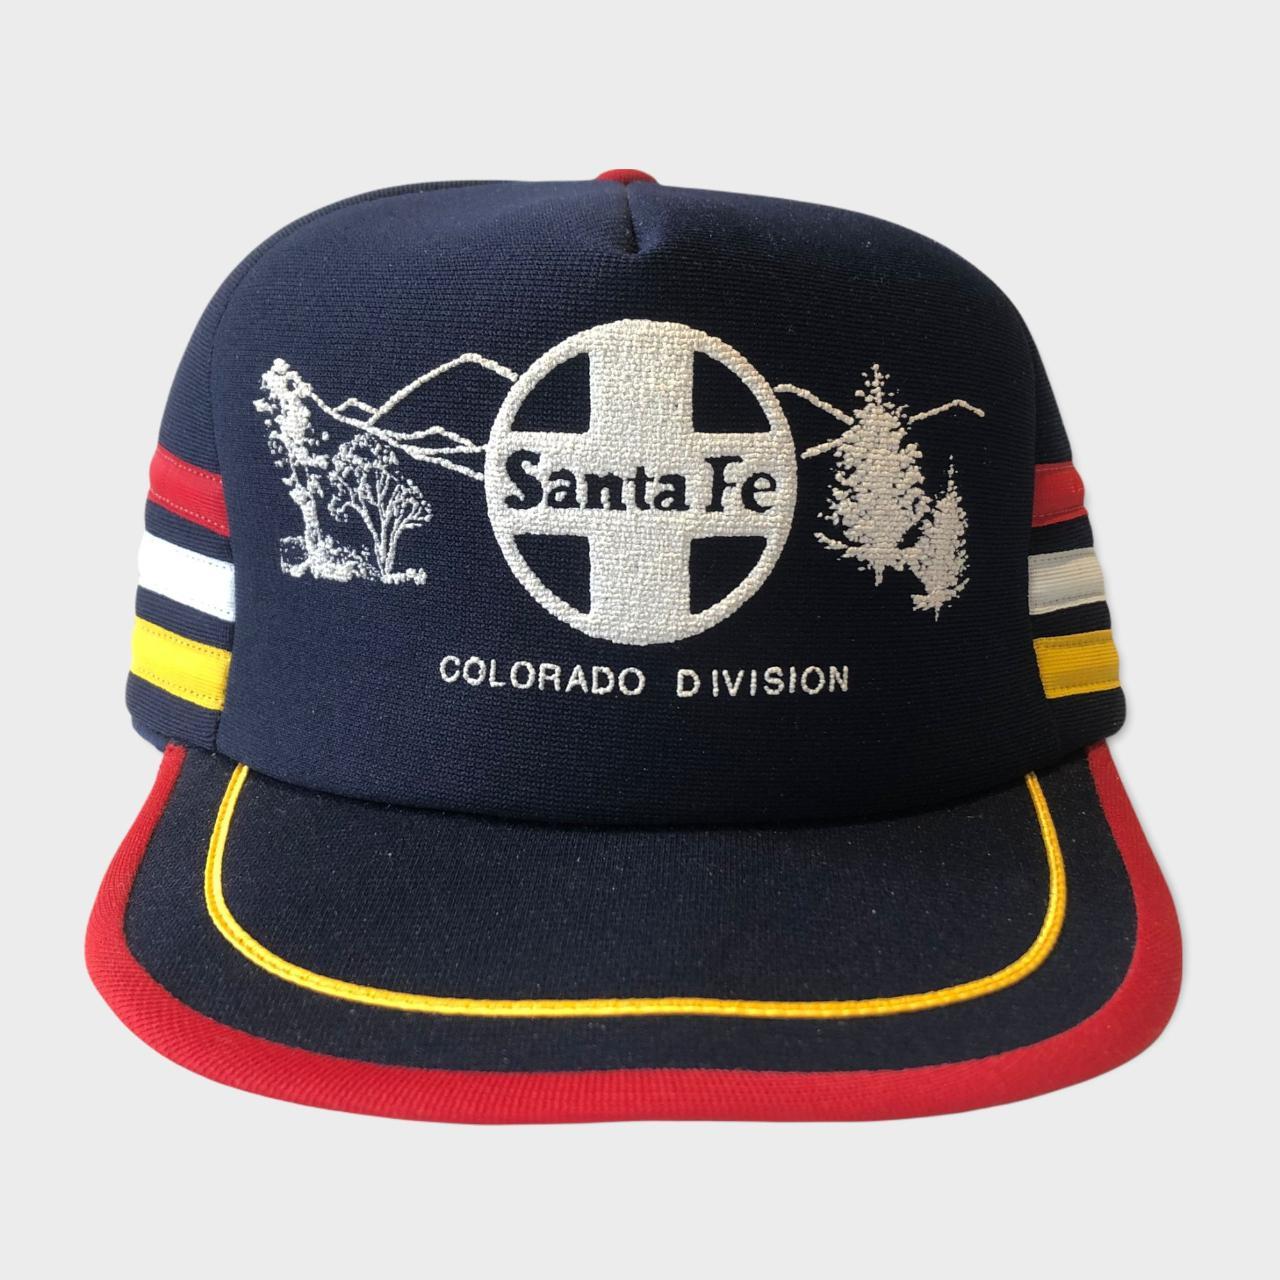 Men's Navy and White Hat (2)